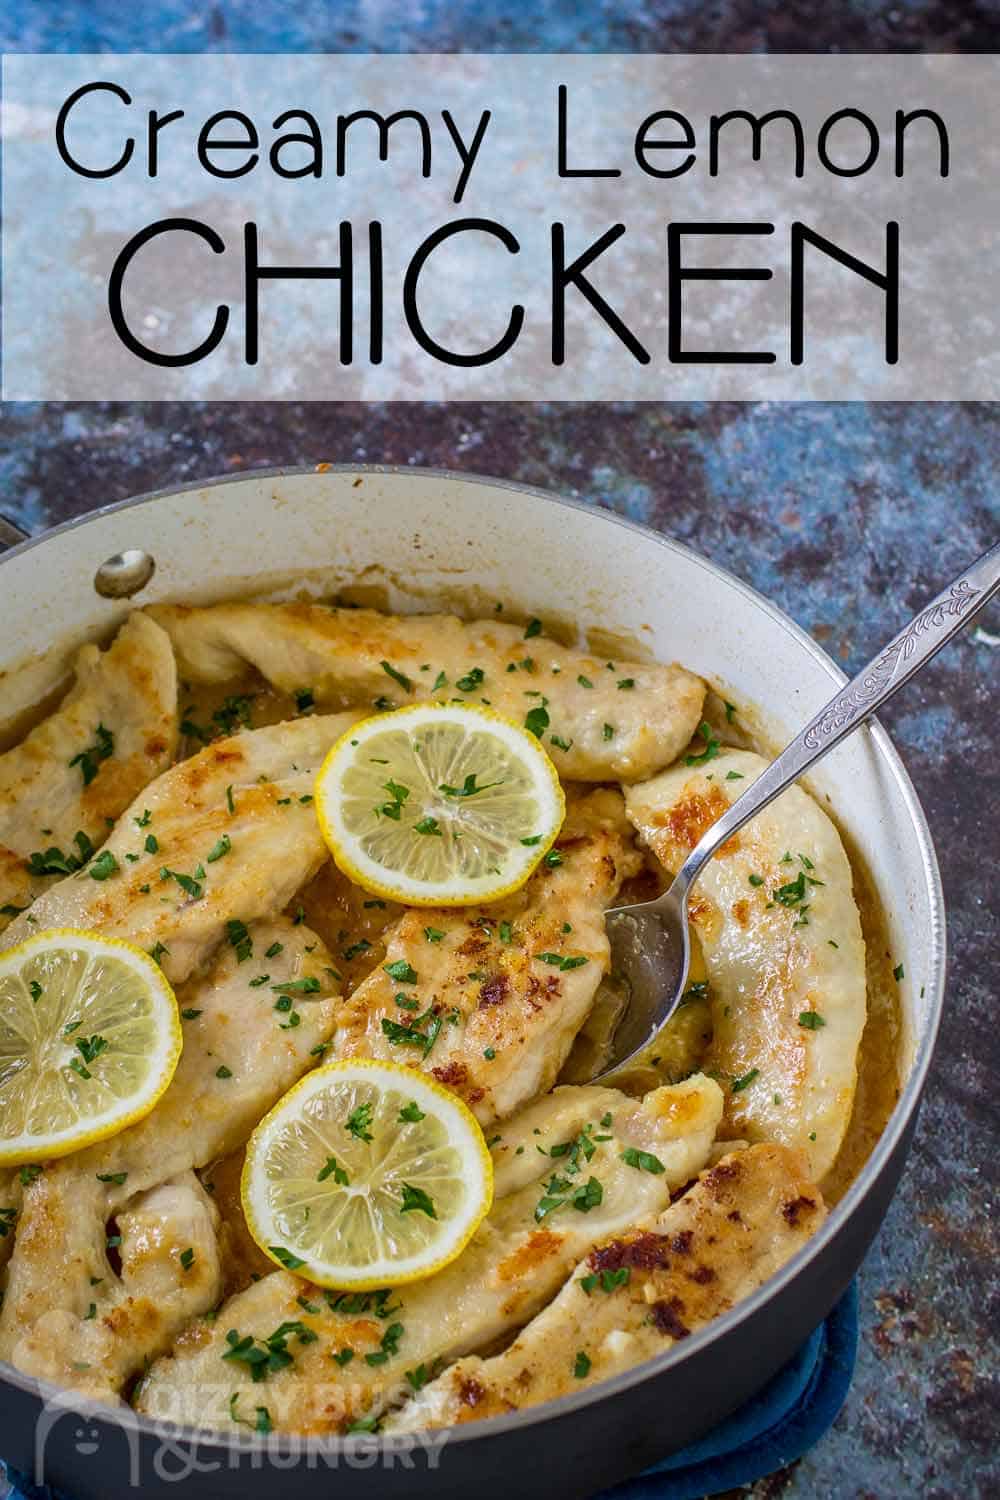 Side shot of creamy lemon chicken in a skillet garnished with lemon slices and herbs with a spoon.